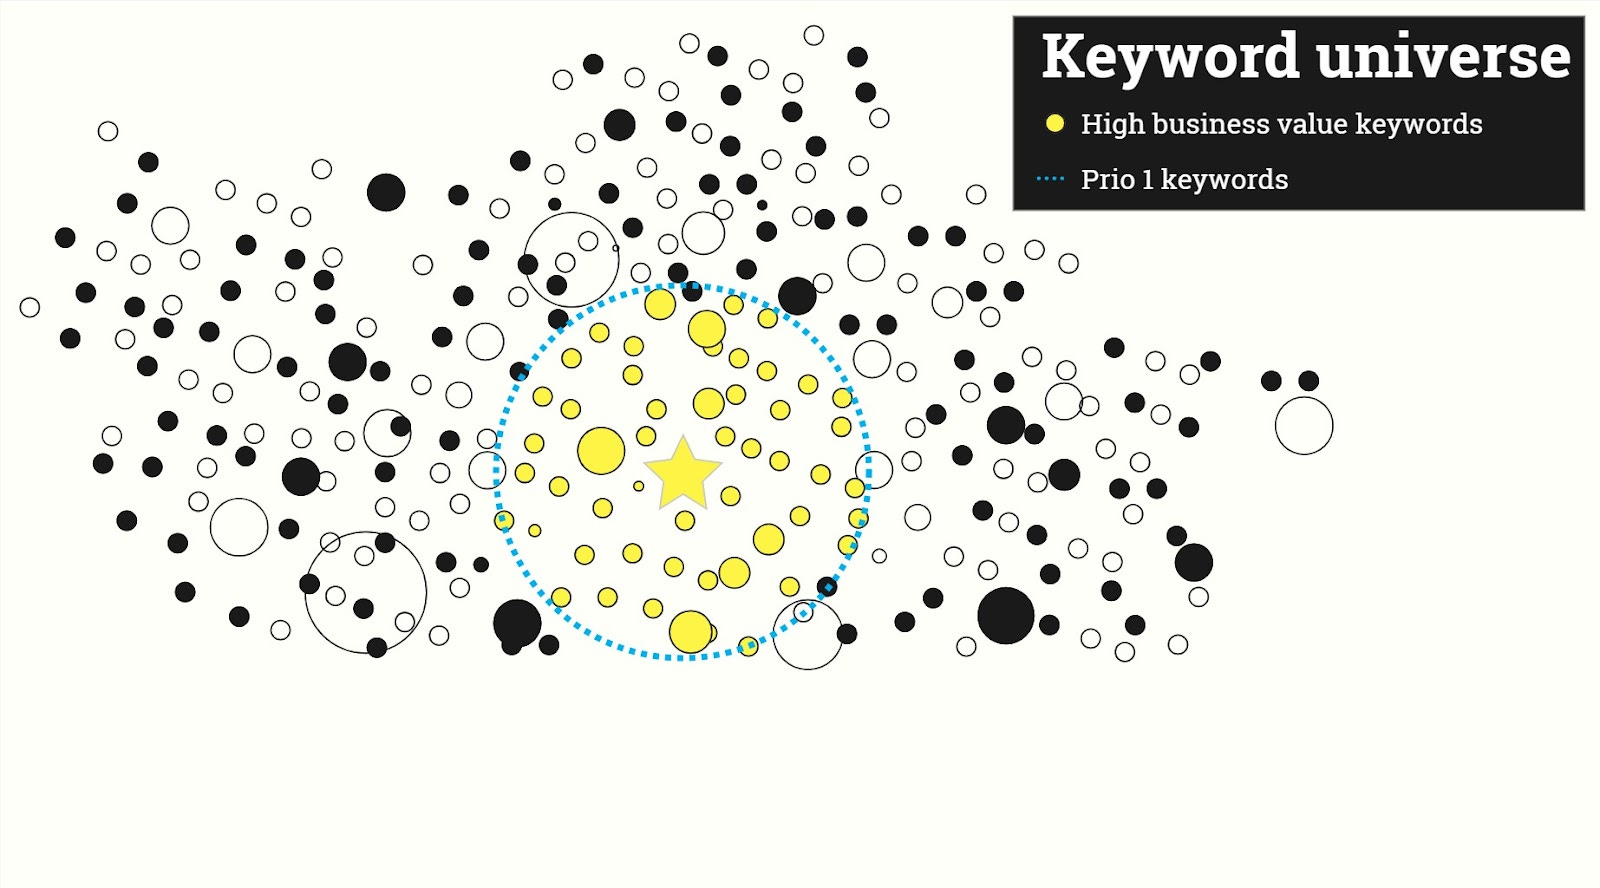 A Keyword Universe is a big pool that surfaces the most important keywords.